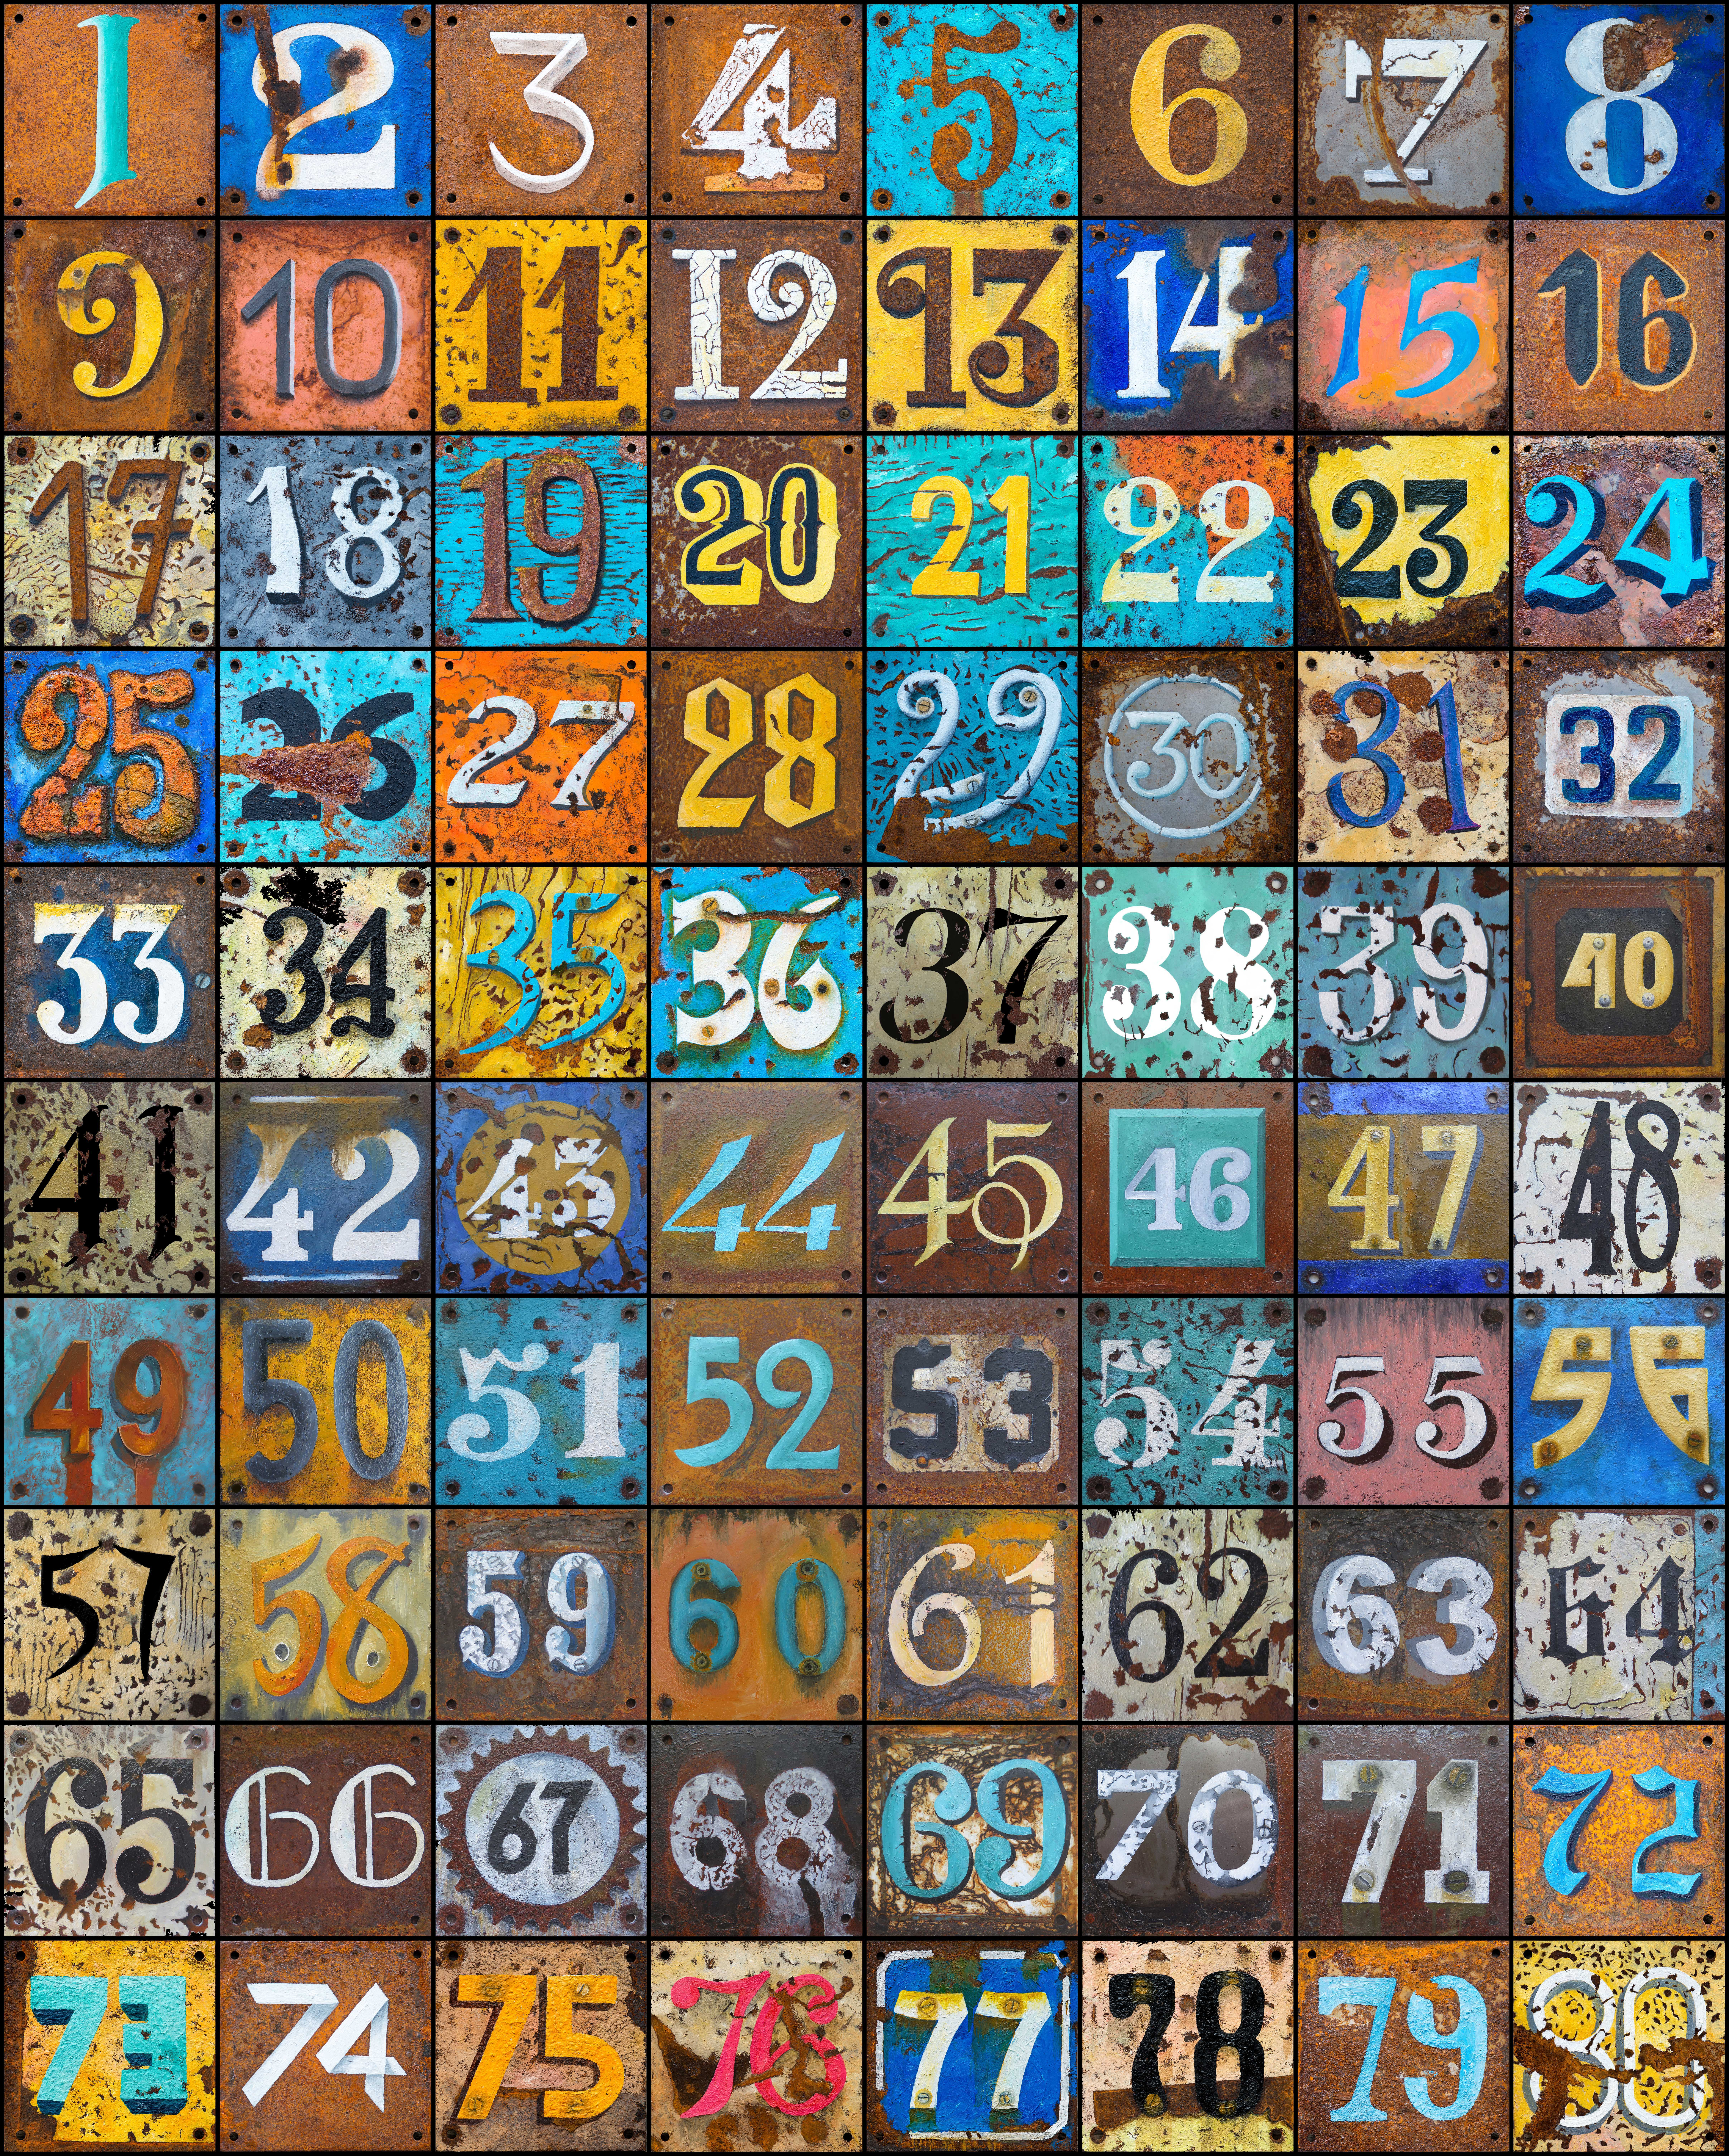 multicolored, motley, rust, texture, numbers, textures 32K